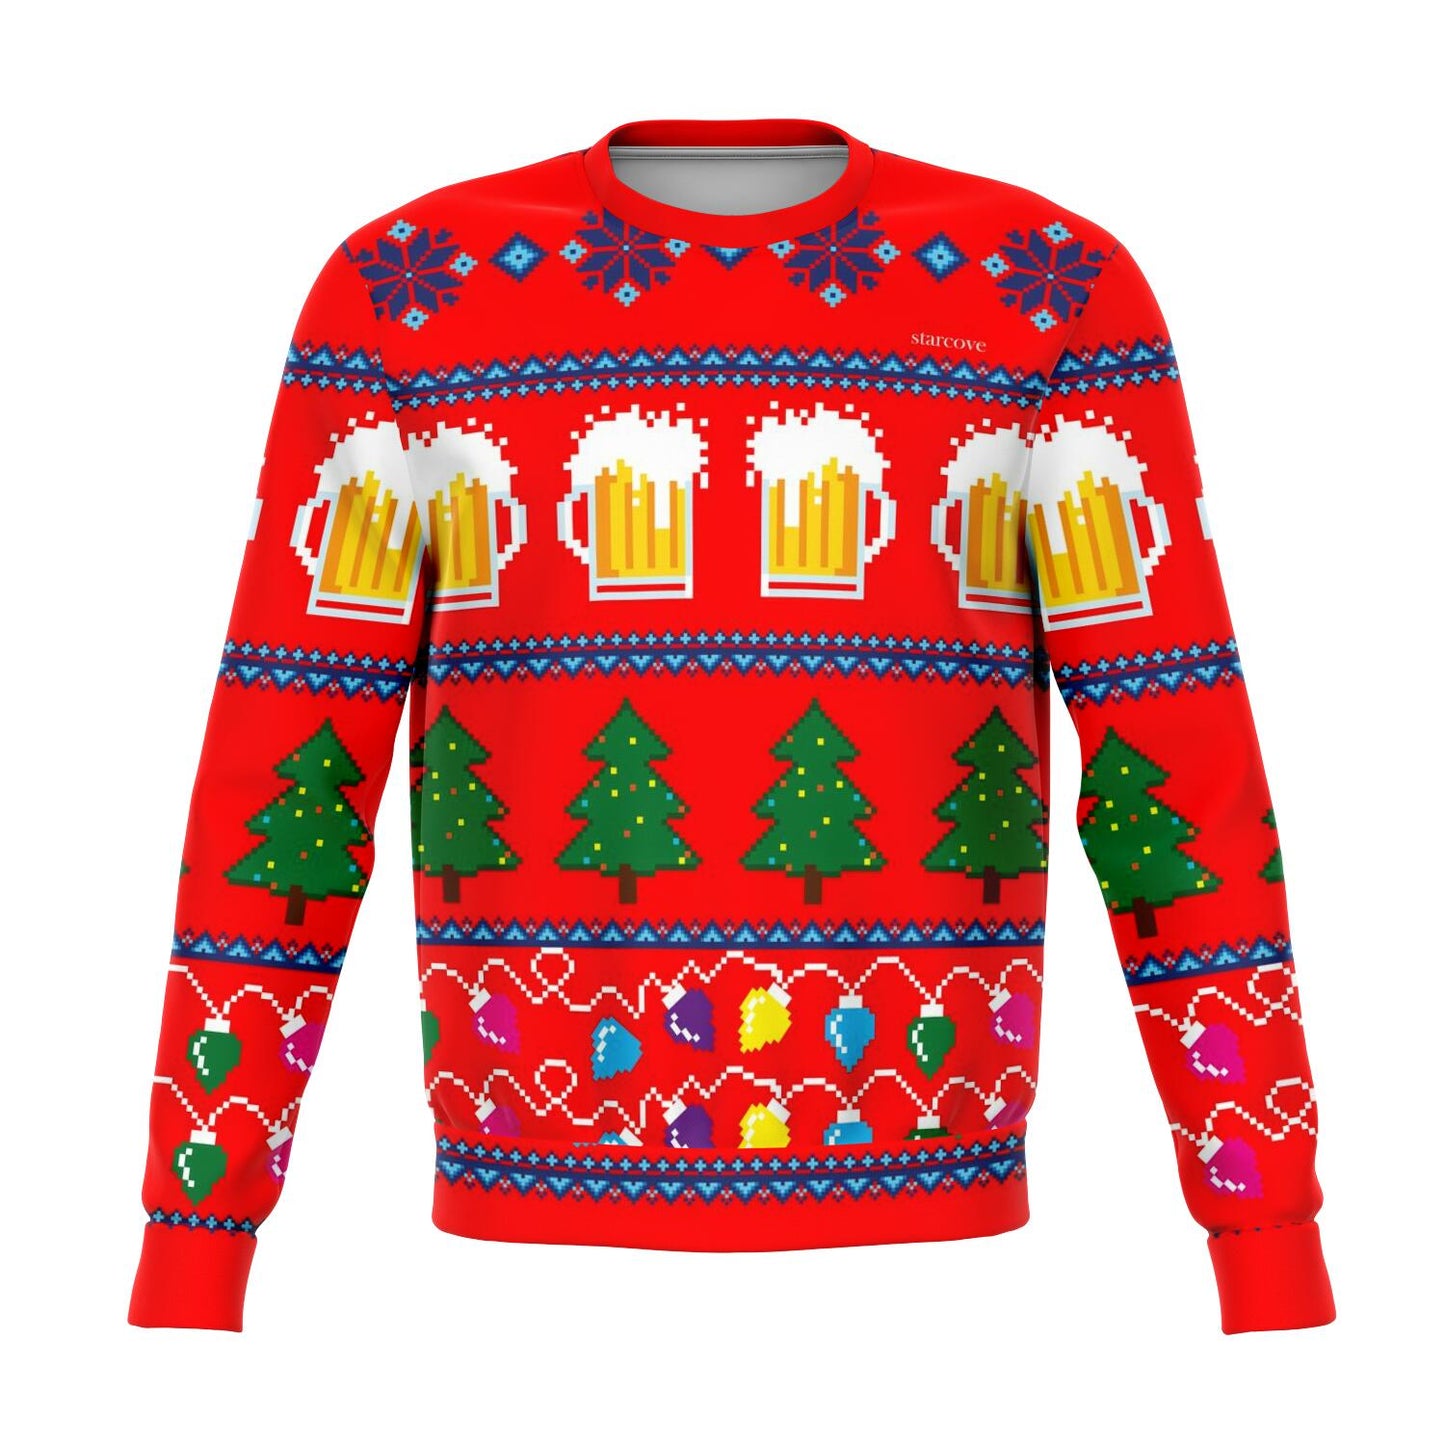 Ugly Christmas Sweater, Party Funny Men Women Lights Beer Stein glass Drinking Bar Tree Xmas Holiday Snowflakes Red Sweatshirt Top Starcove Fashion